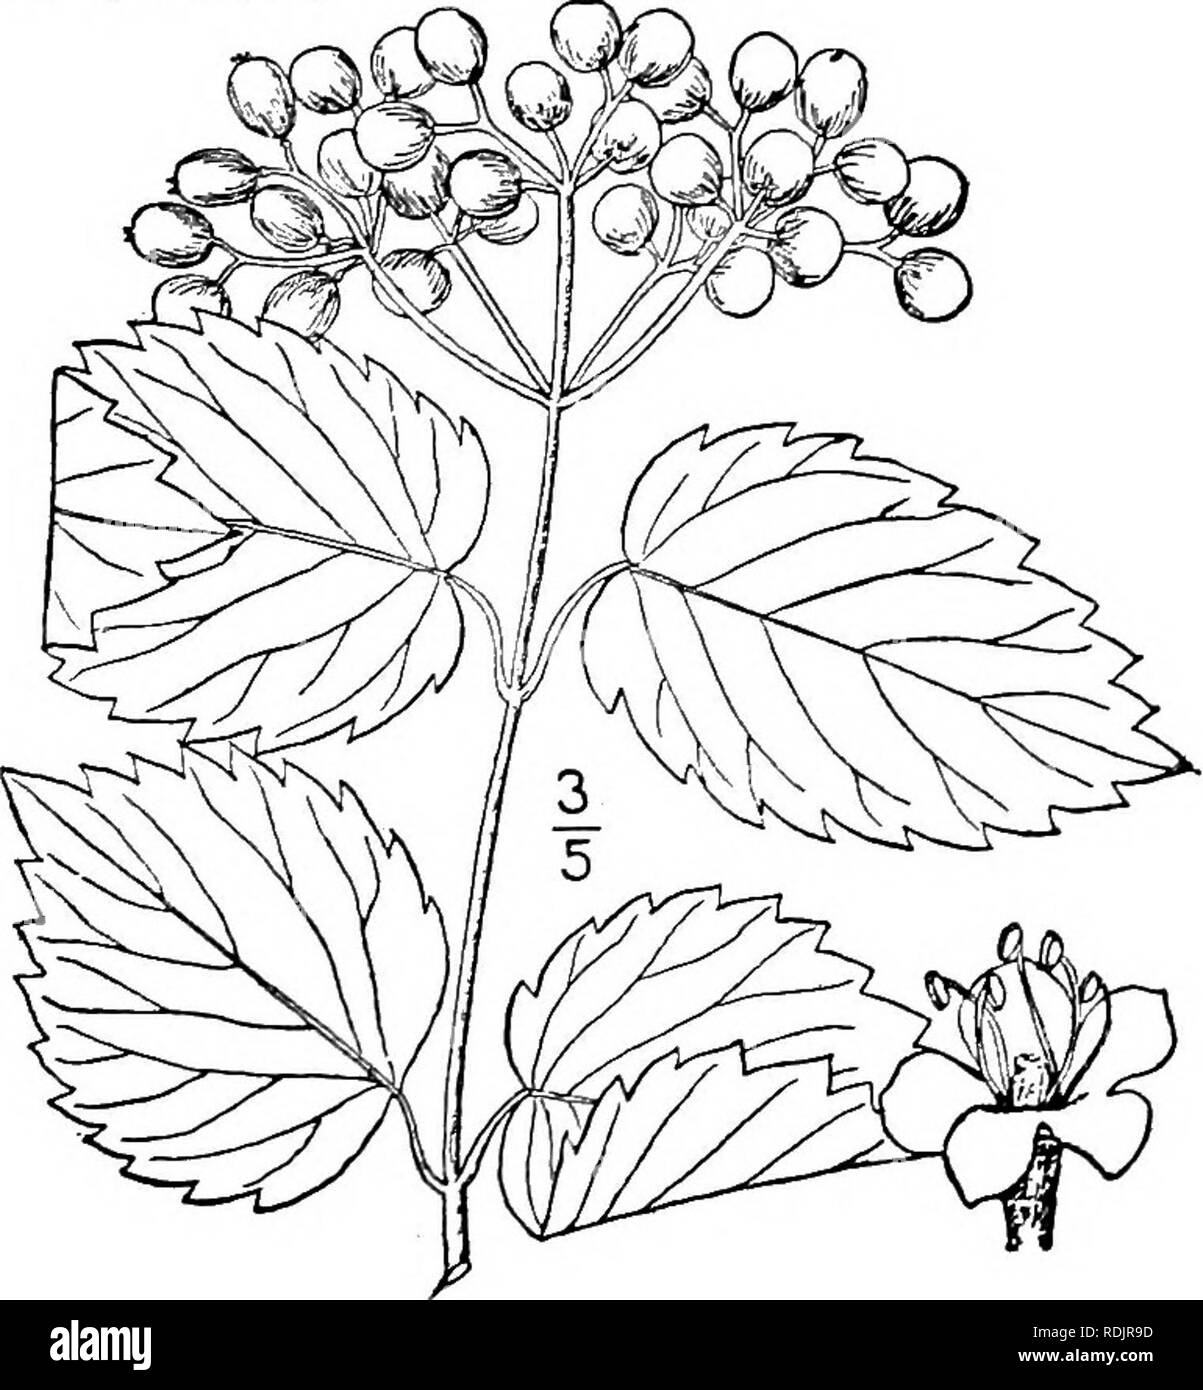 . An illustrated flora of the northern United States, Canada and the British possessions, from Newfoundland to the parallel of the southern boundary of Virginia, and from the Atlantic Ocean westward to the 102d meridian. Botany; Botany. Genus 2. HONEYSUCKLE FAMILY. 5. Viburnum pubescens (Ait.) Pursh. Downy-leaved Arrow-wood Fig. 3961. Viburnum dentatum var. pubescens Ait. Hort. Kew. 1: 372- 1789. V. pubescens Pursh, FI. Am. Sept. 202. 1814. A shrub, 2°-S° high, with numerous straight and slender gray branches. Leaves sessile, or on petioles less than 3&quot; long, ovate or oval, rounded or sli Stock Photo